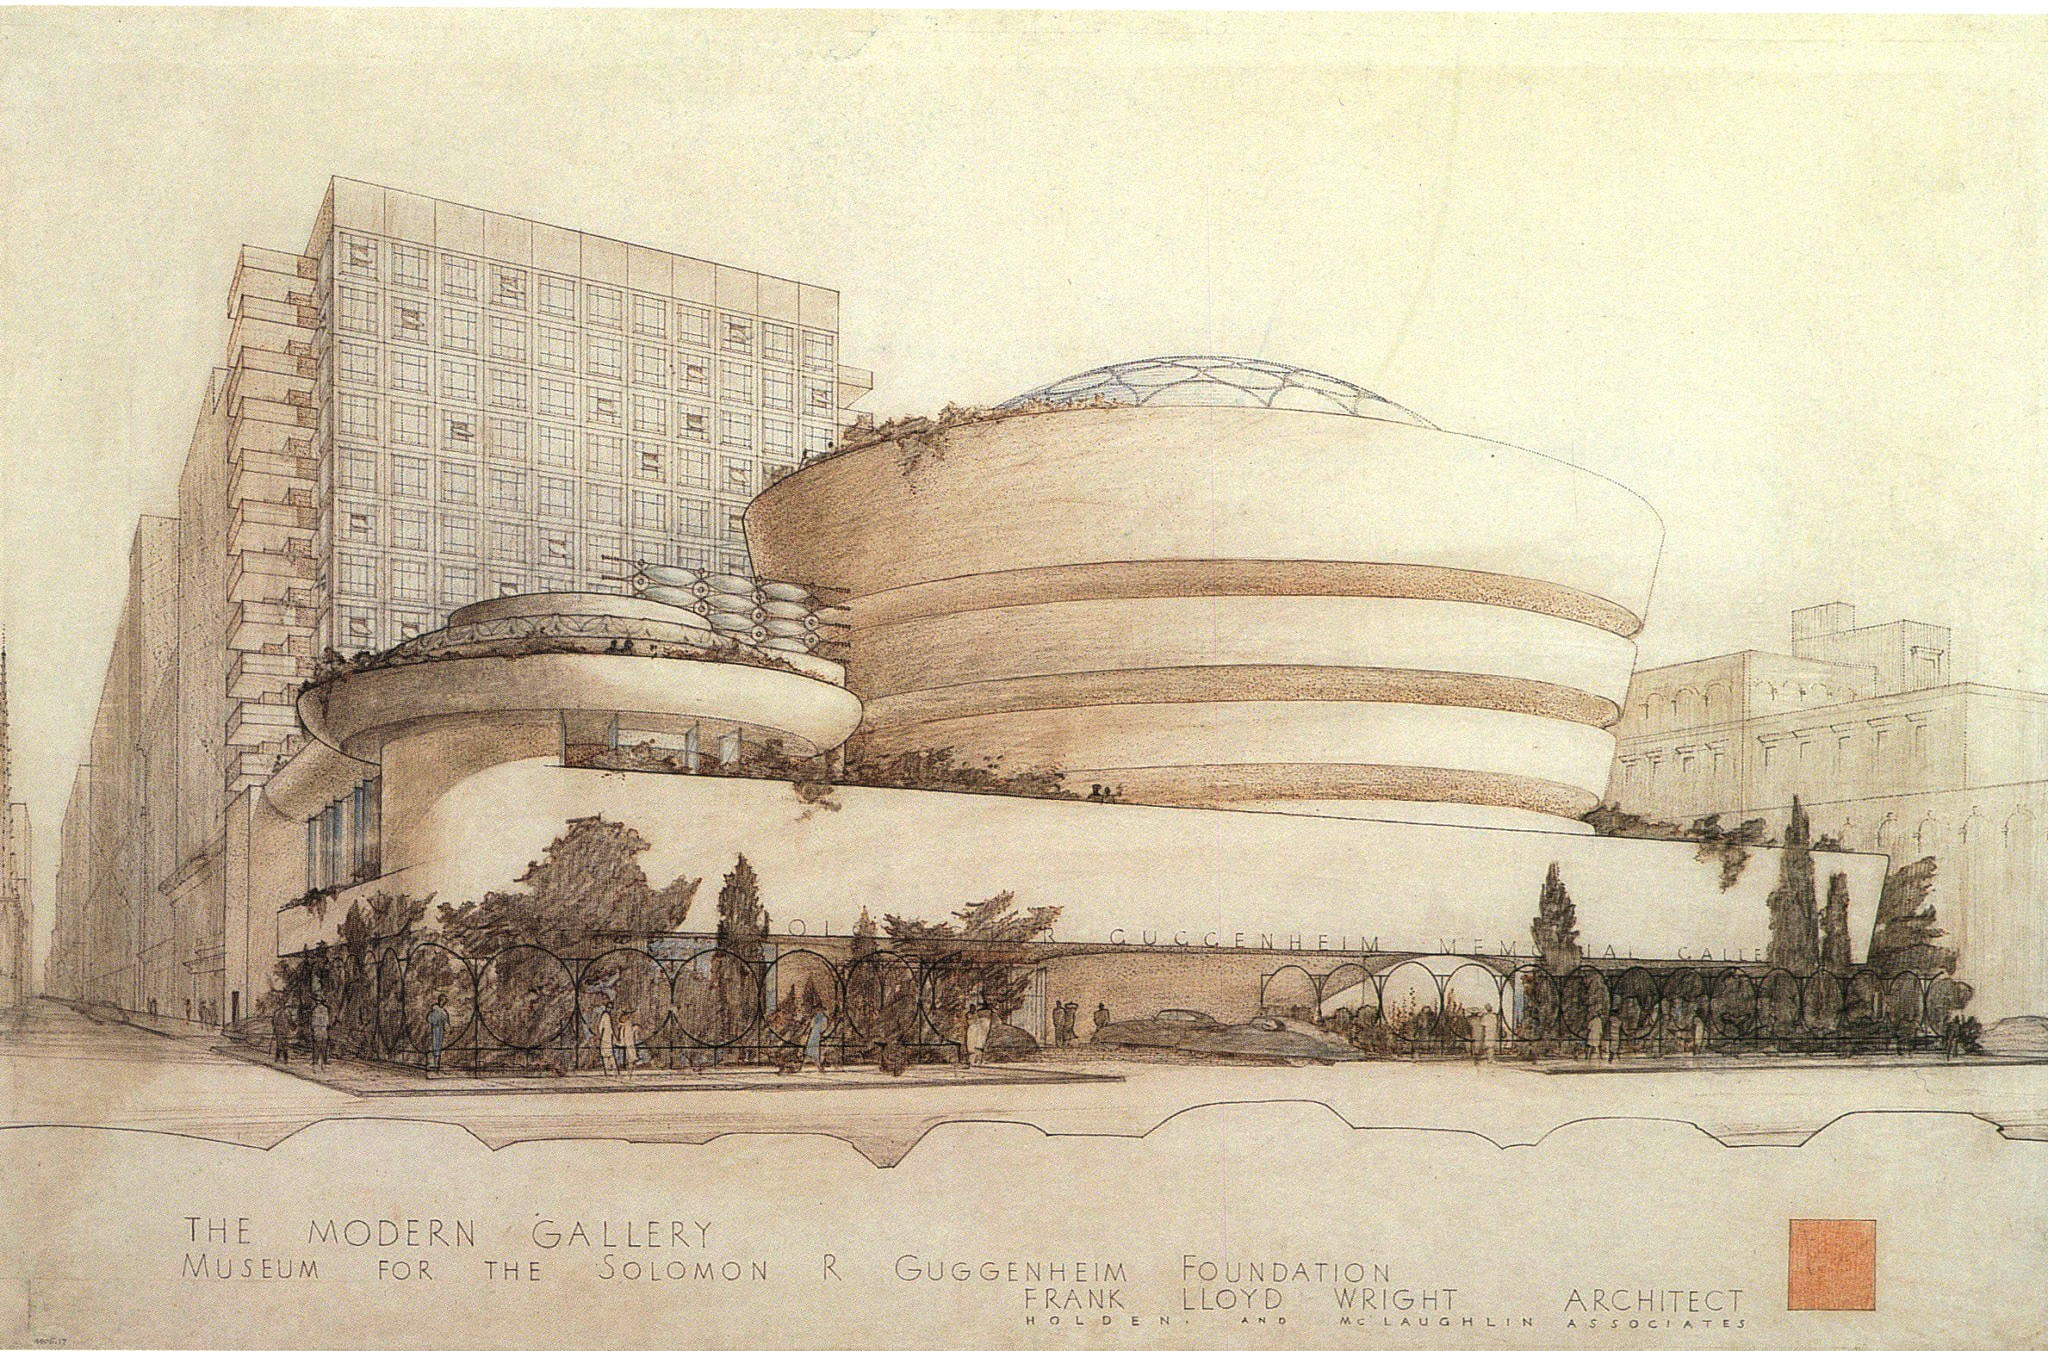 Guggenheim Museum, perspective drawing by Holden & McLaughlin Associates (where FC Wells worked). Circa 1956.